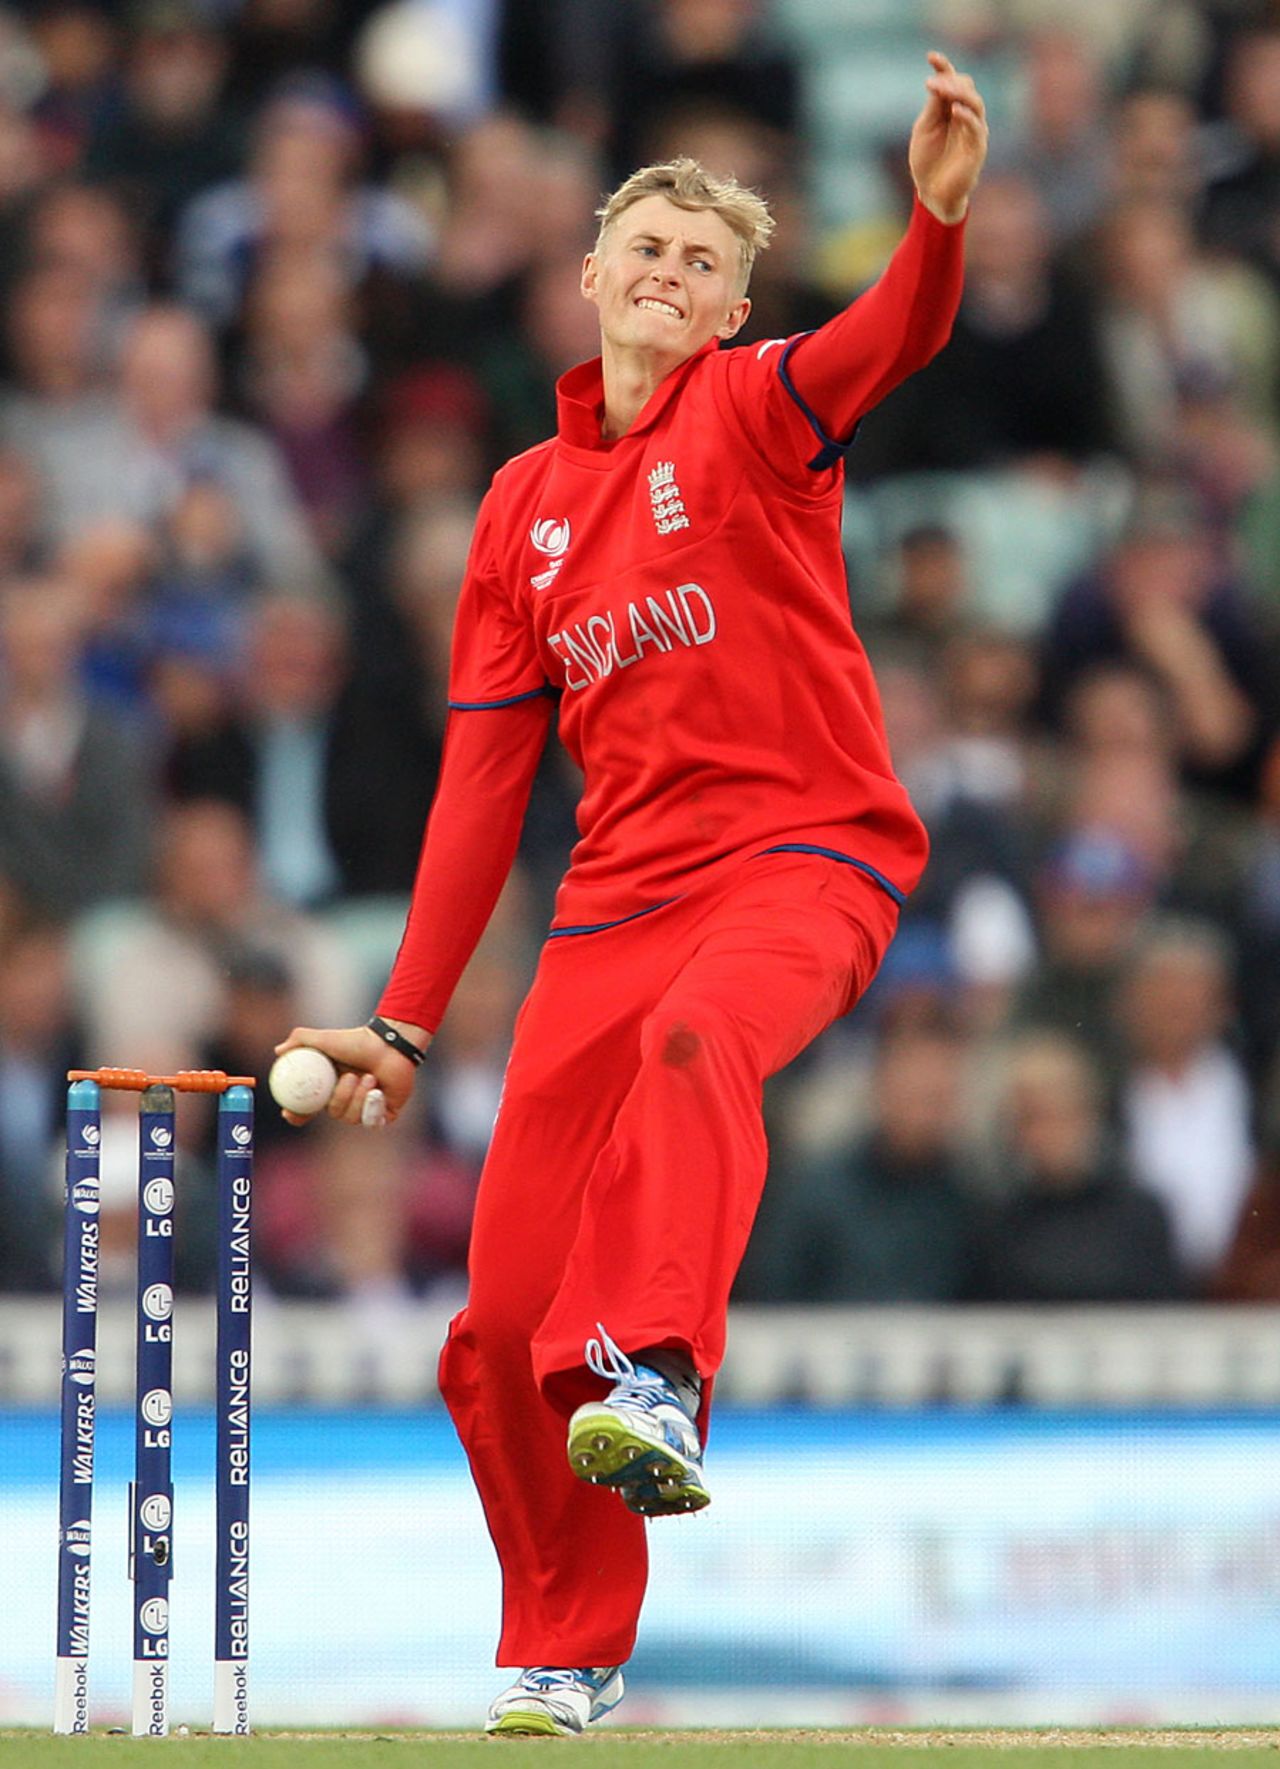 Joe Root proved expensive, England v Sri Lanka, Champions Trophy, Group A, The Oval, June 13, 2013